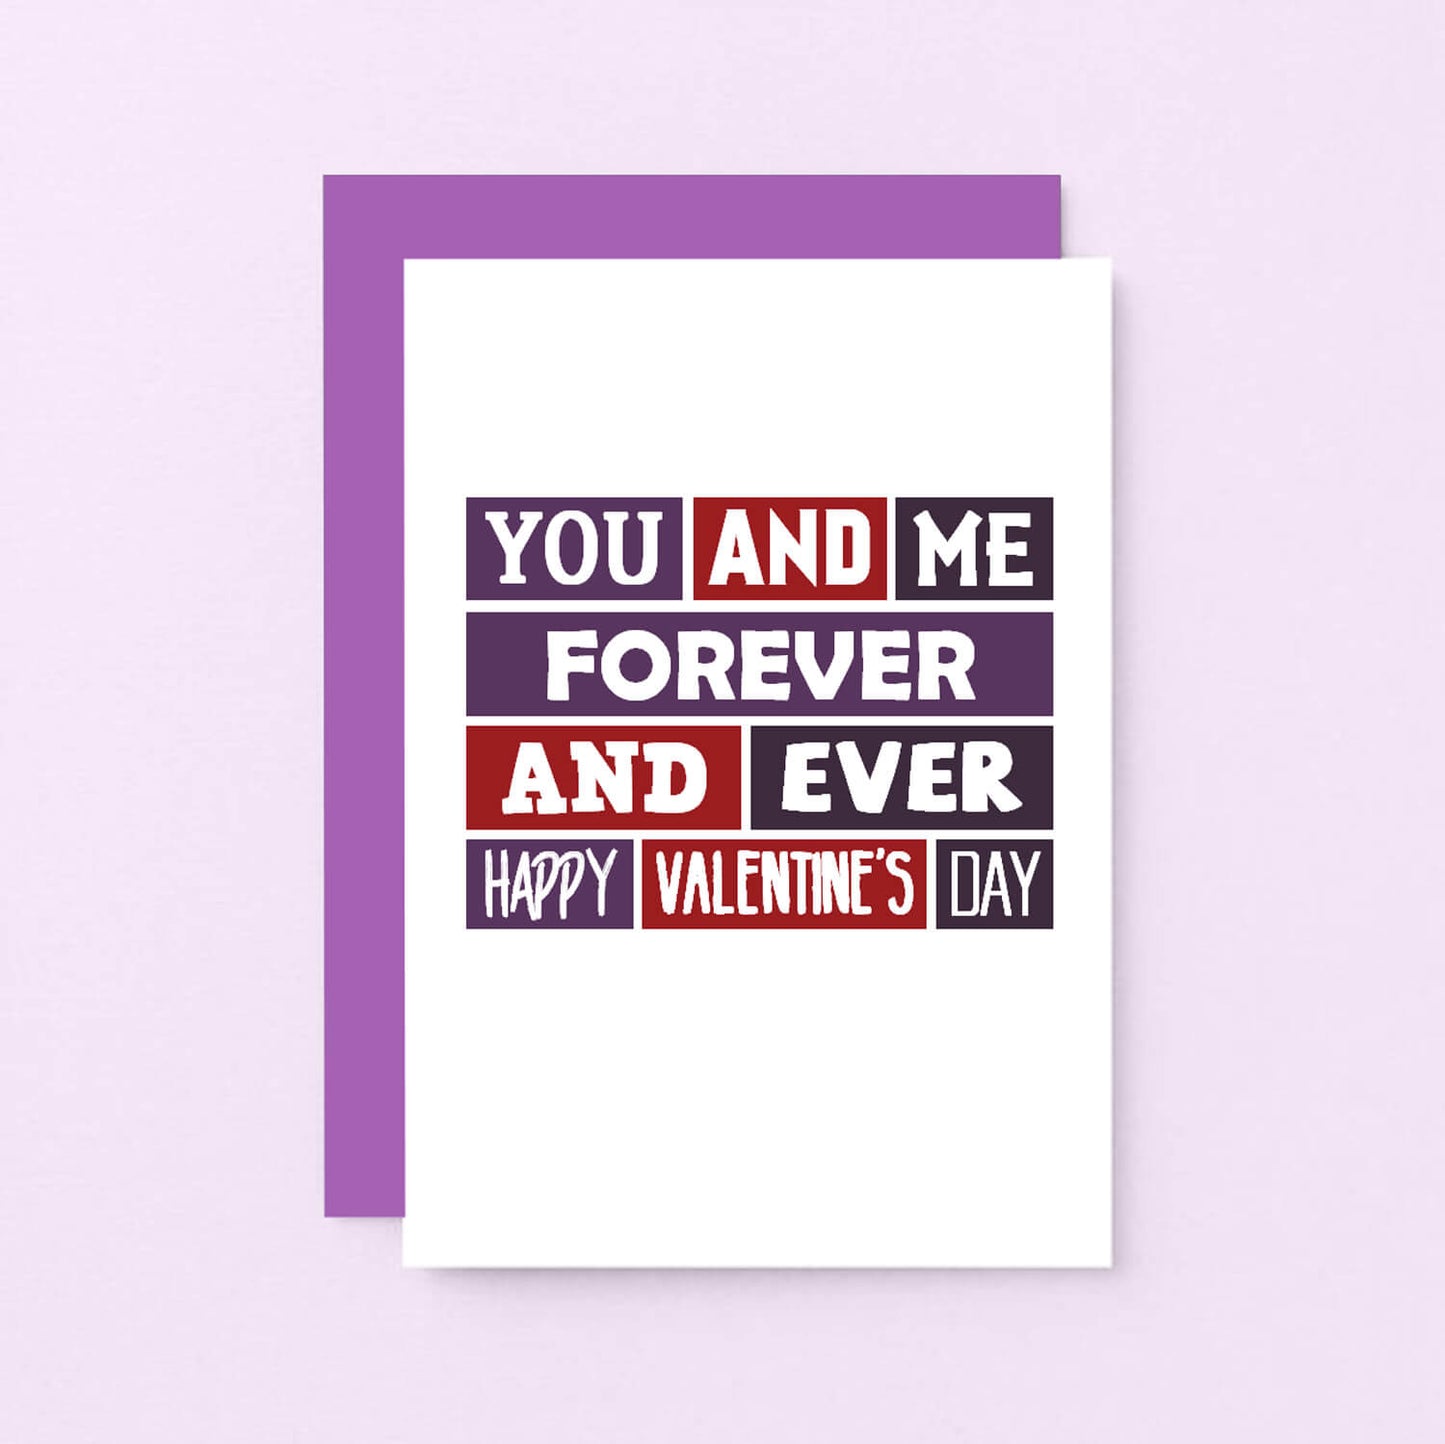 Valentine Card by SixElevenCreations. Card reads You and me Forever and ever. Happy Valentine's Day. Product Code SEV0017A6